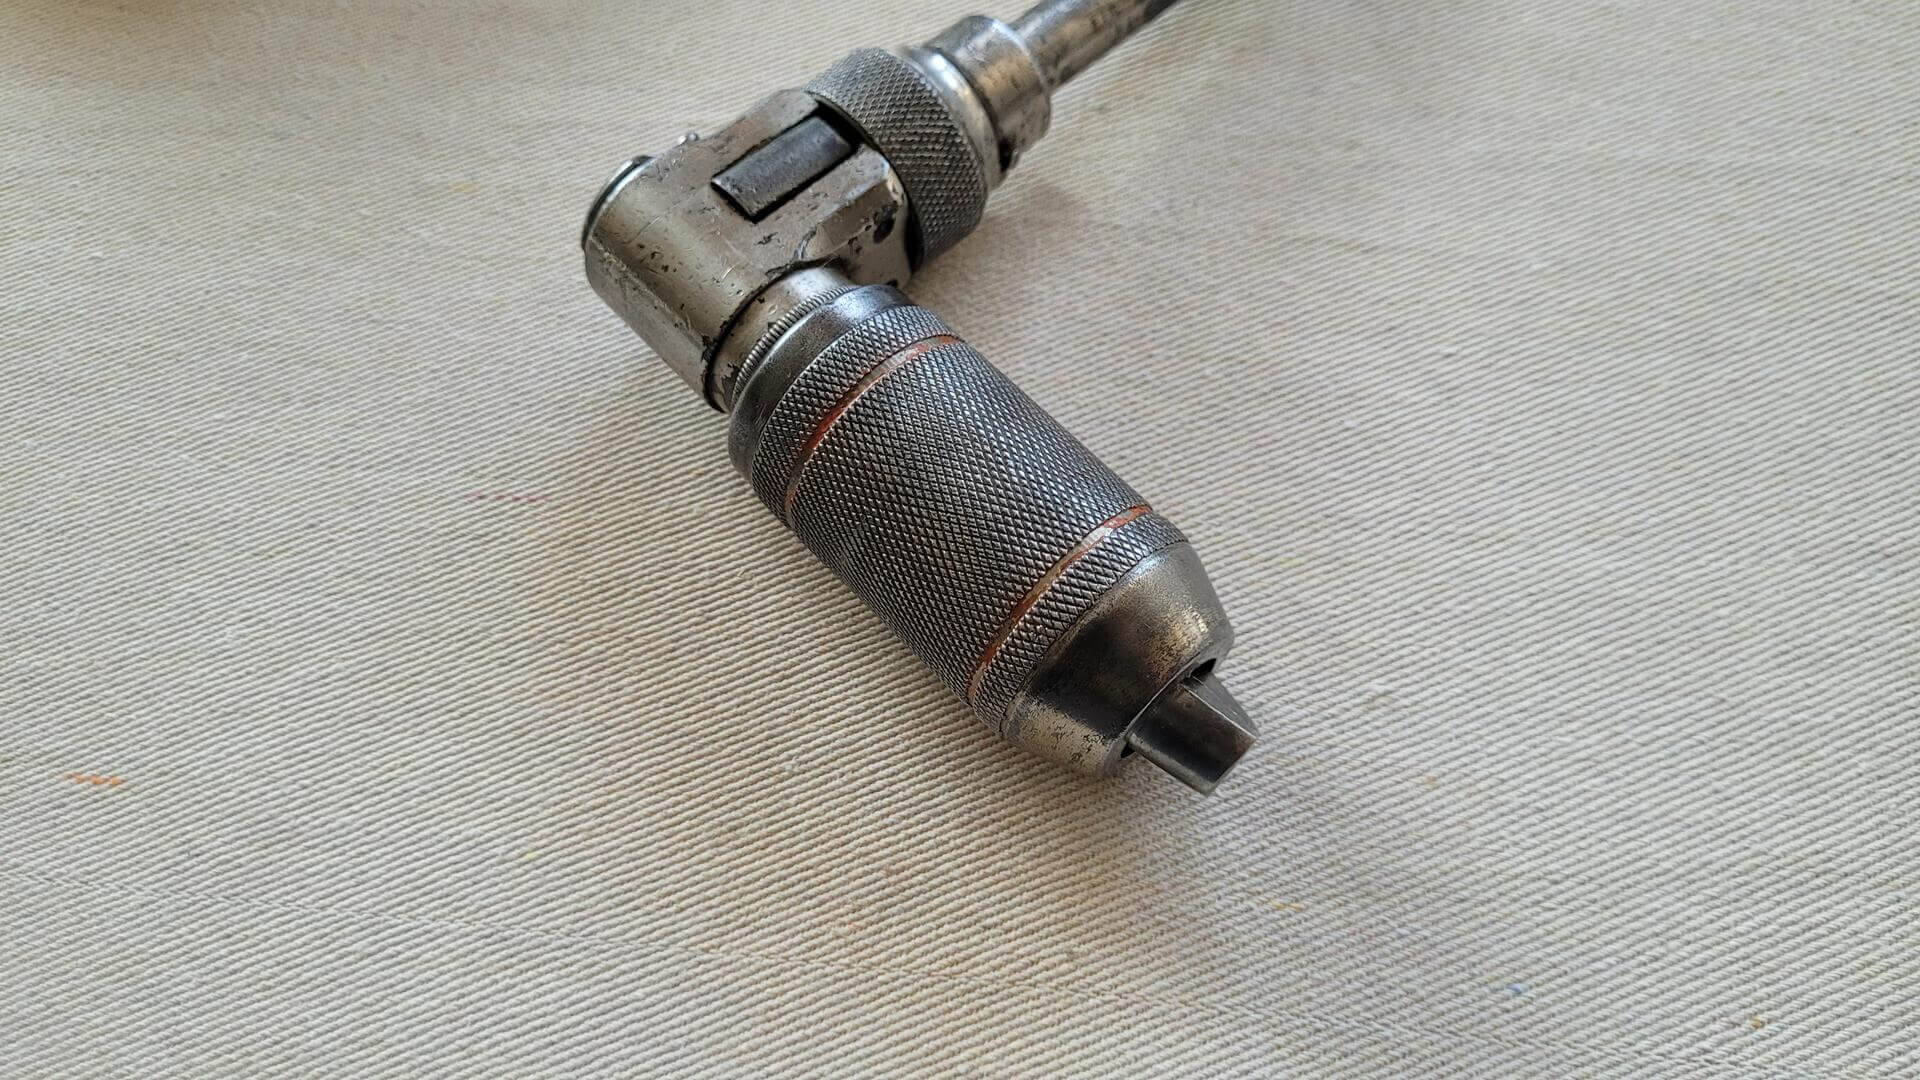 Vintage Stanley No. 923-10 ratcheting reversible auger bit brace hand drill. Antique made in Canada collectible carpentry, woodworking & cabinet maker tools